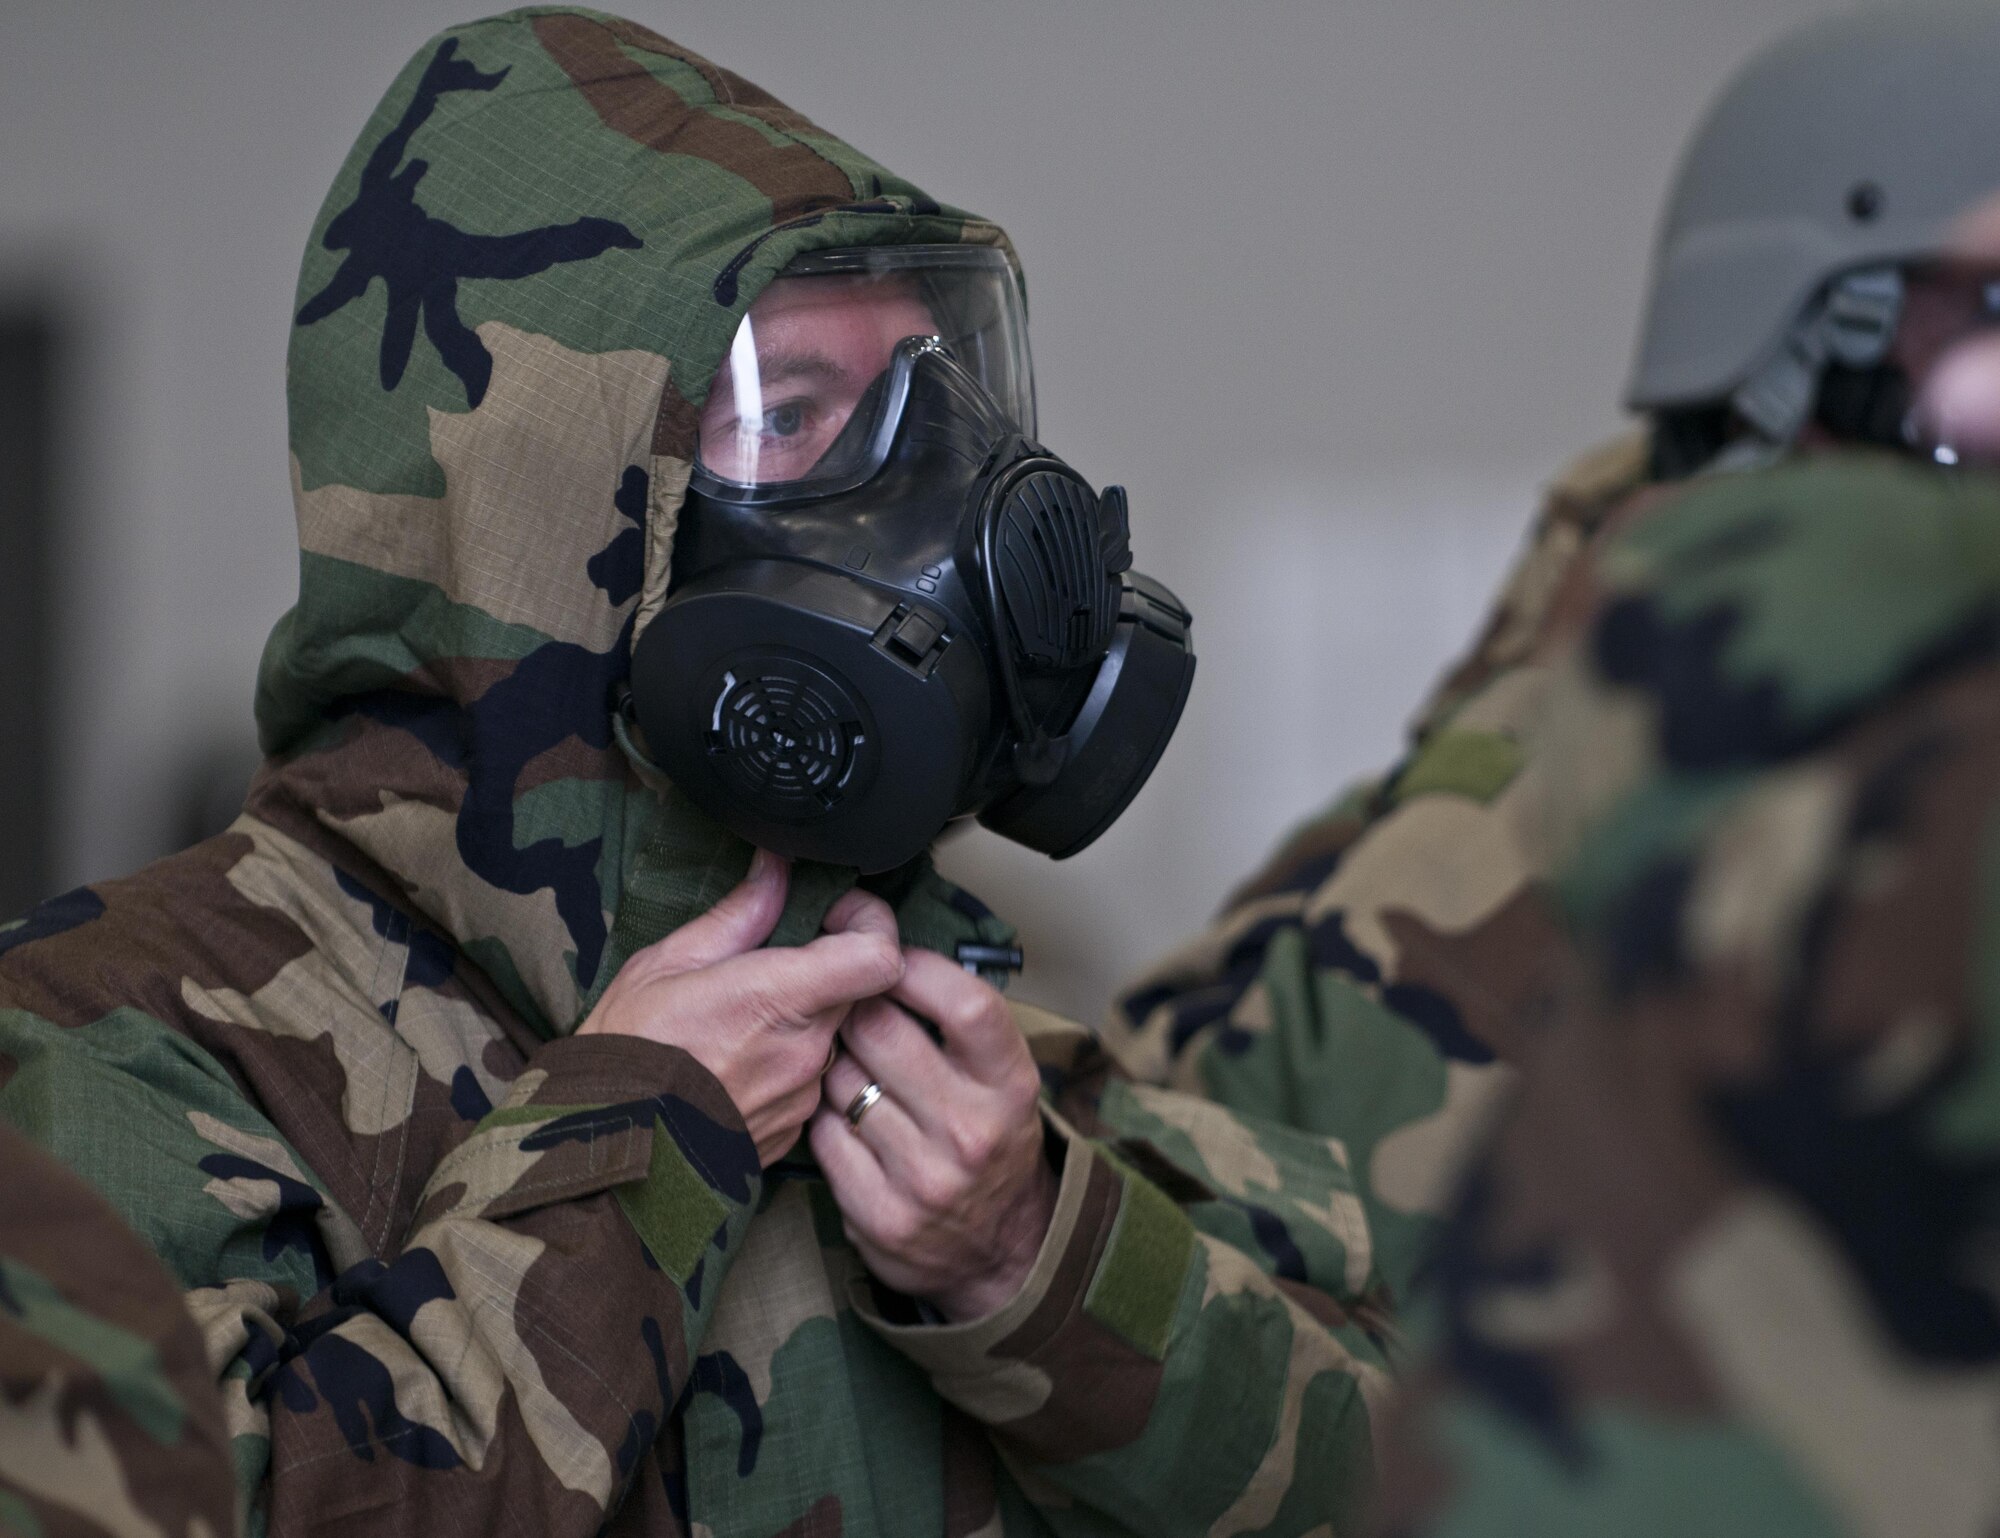 U.S. Air Force Airmen assigned to the 916th Air Refueling Wing participated in an Ability to Survive and Operate Rodeo at Seymour Johnson Air Force Base, N.C., Nov. 4, 2017. Approximately 300 Airmen, donned Mission-Oriented Protective Posture gear to test their ability to accurately and quickly change between postures, as well as performed tests to detect chemical agents in a potentially contaminated area.